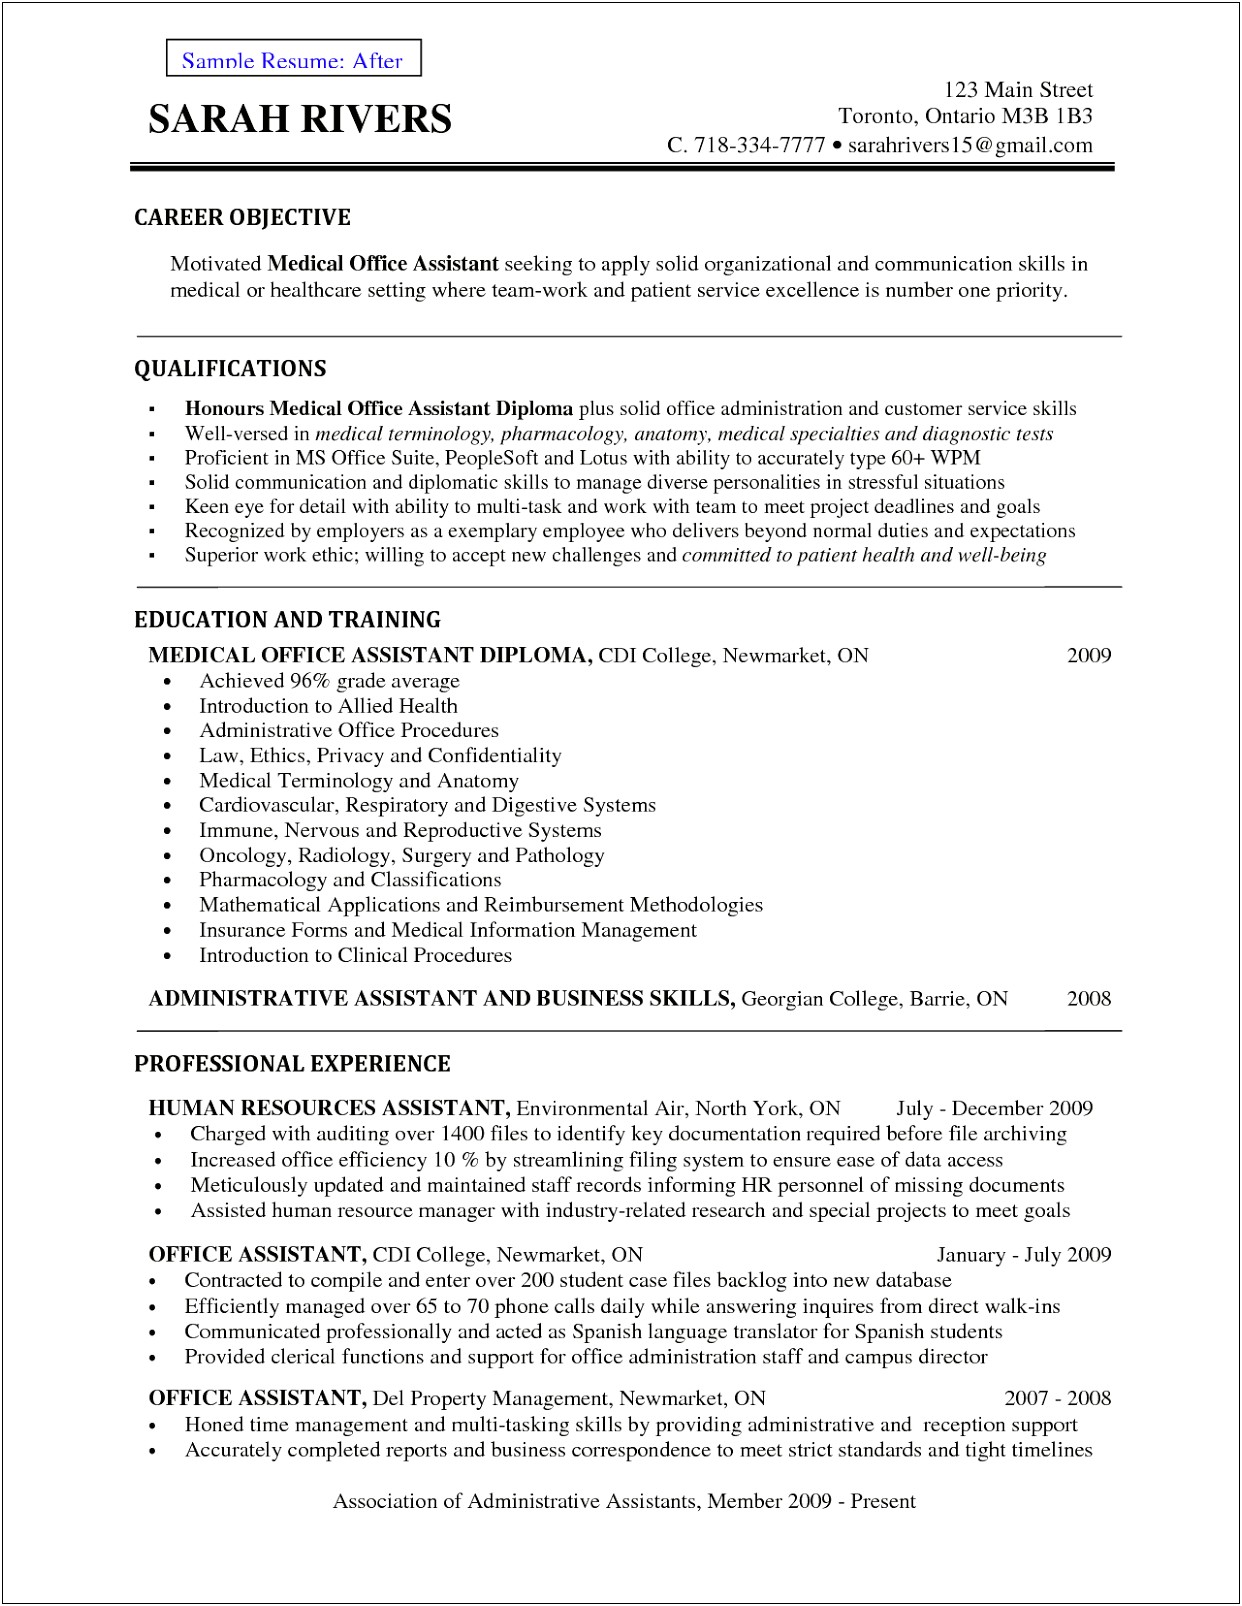 Resume Exapmles Withh Job Objectiv